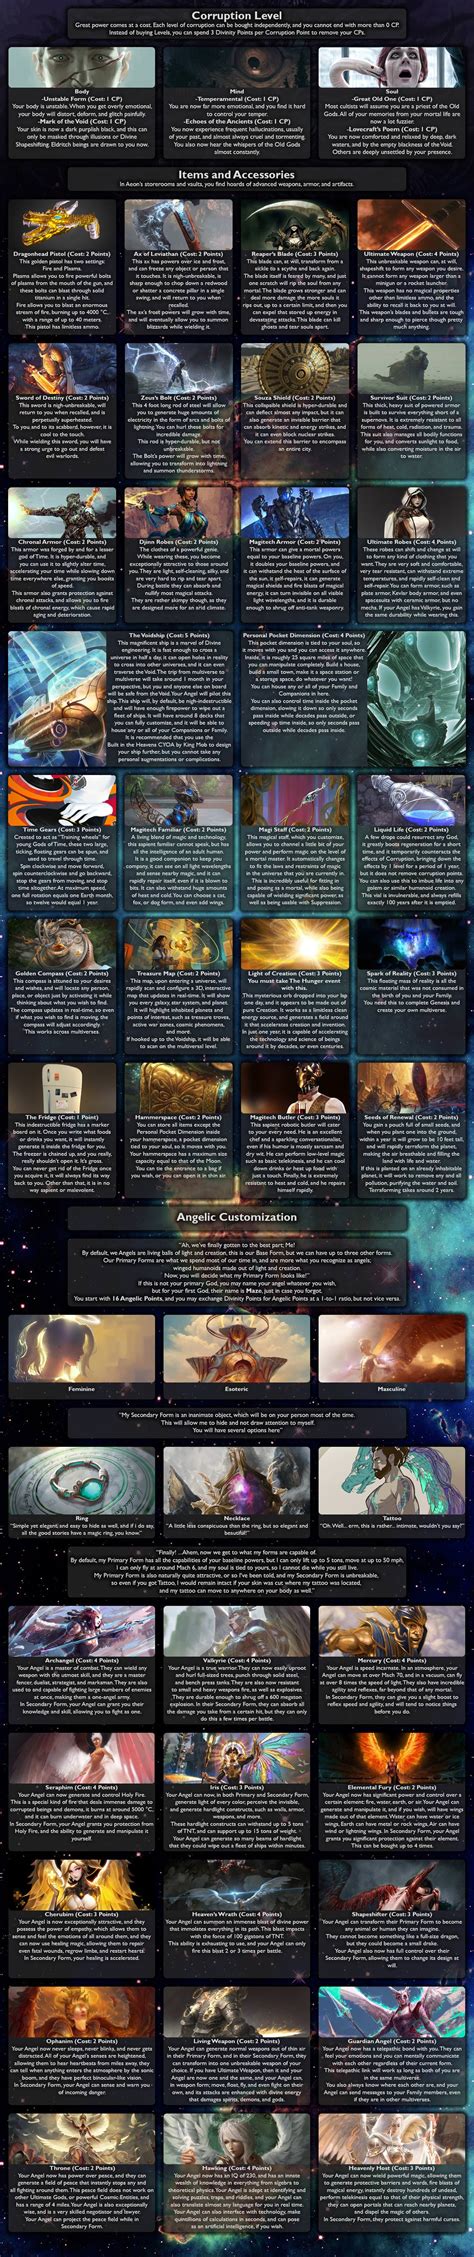 God cyoa. Living God CYOA + Infinite Points = strongest being in existence Even without infinite points you could still get all the powers and necessary Perks shown in Worm CYOA V1. Worm CYOA V5 Update Gimel suddenly becomes a cakewalk since you'd have every single power without needing to do the whole time travel bullshit. 